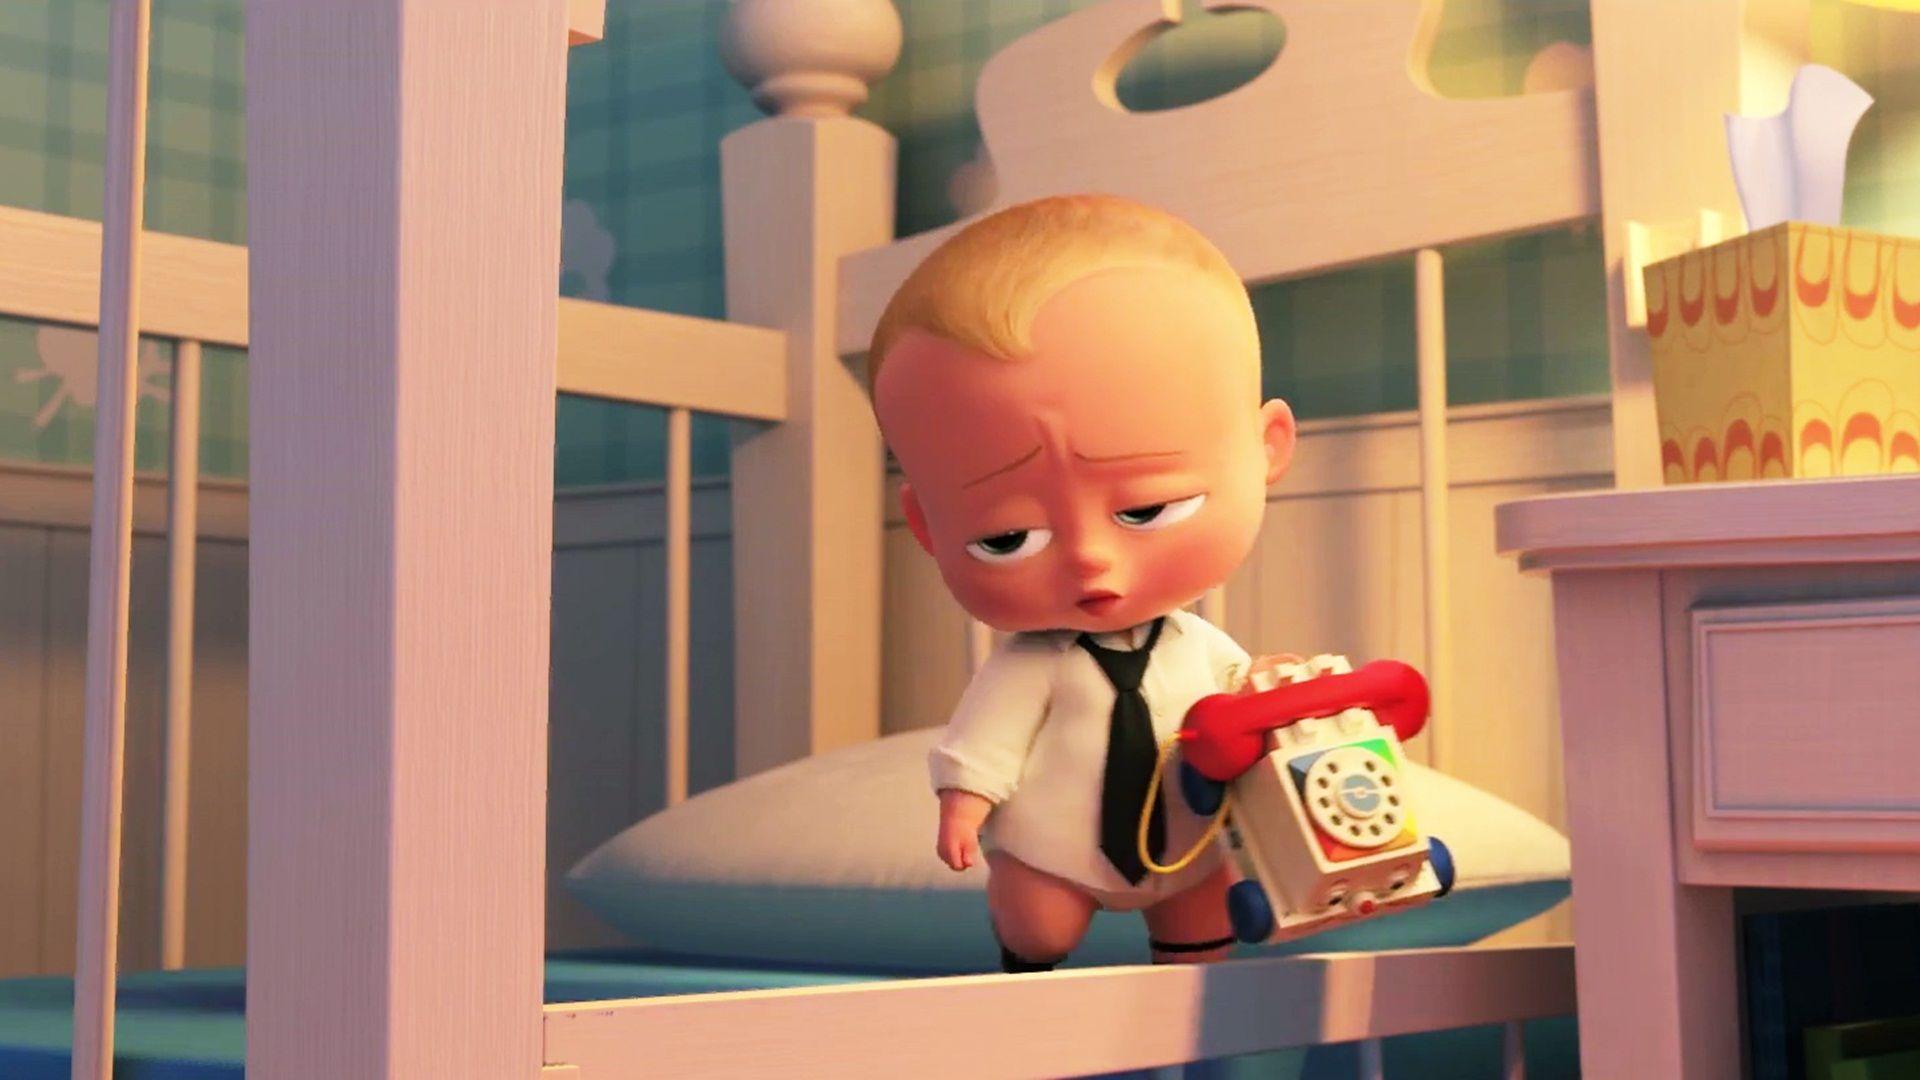 The Boss Baby, starring Alec Baldwin, is more fantastical than you